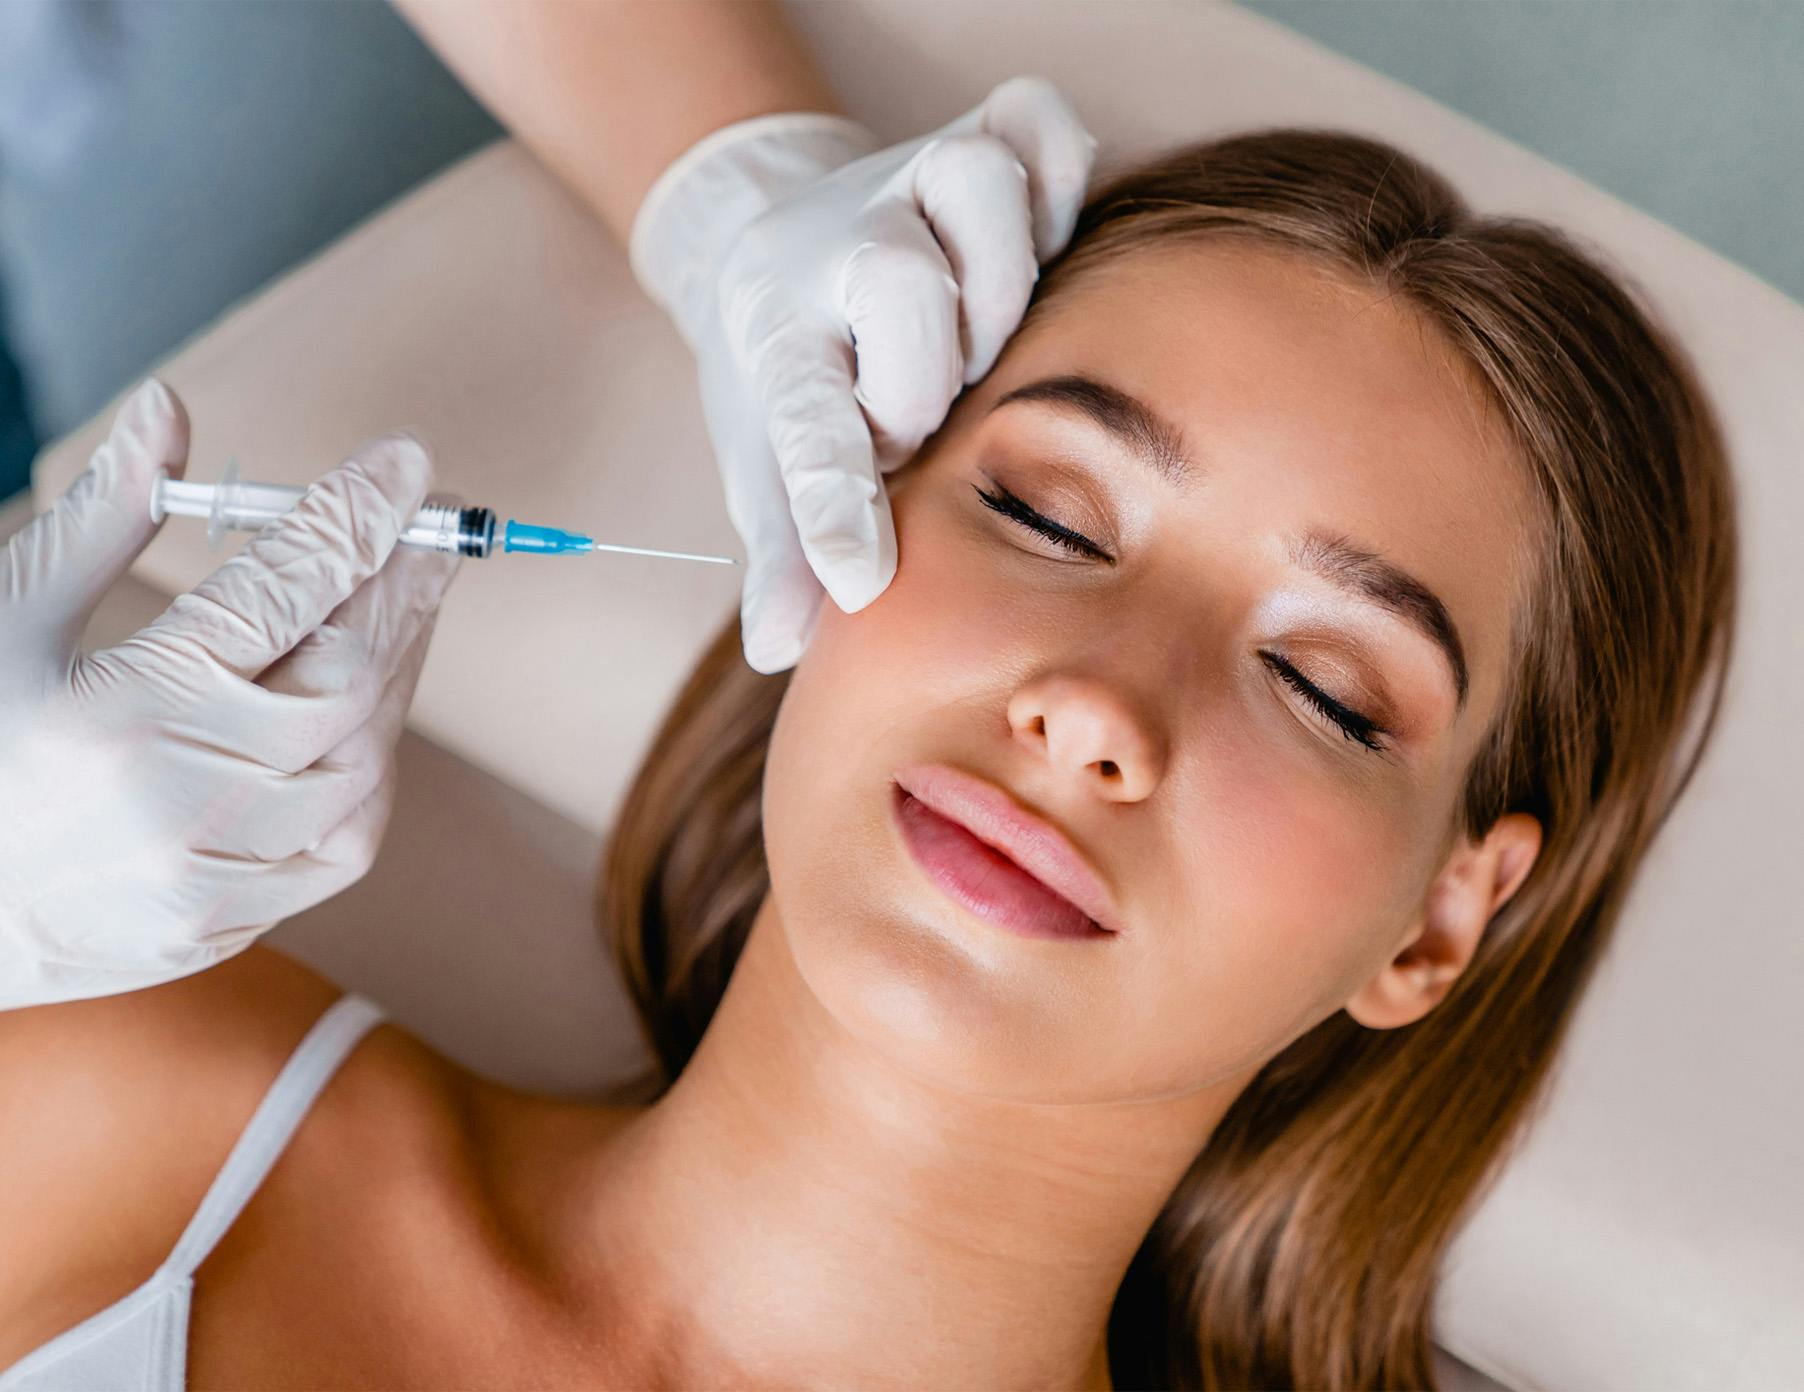 receiving an injectable